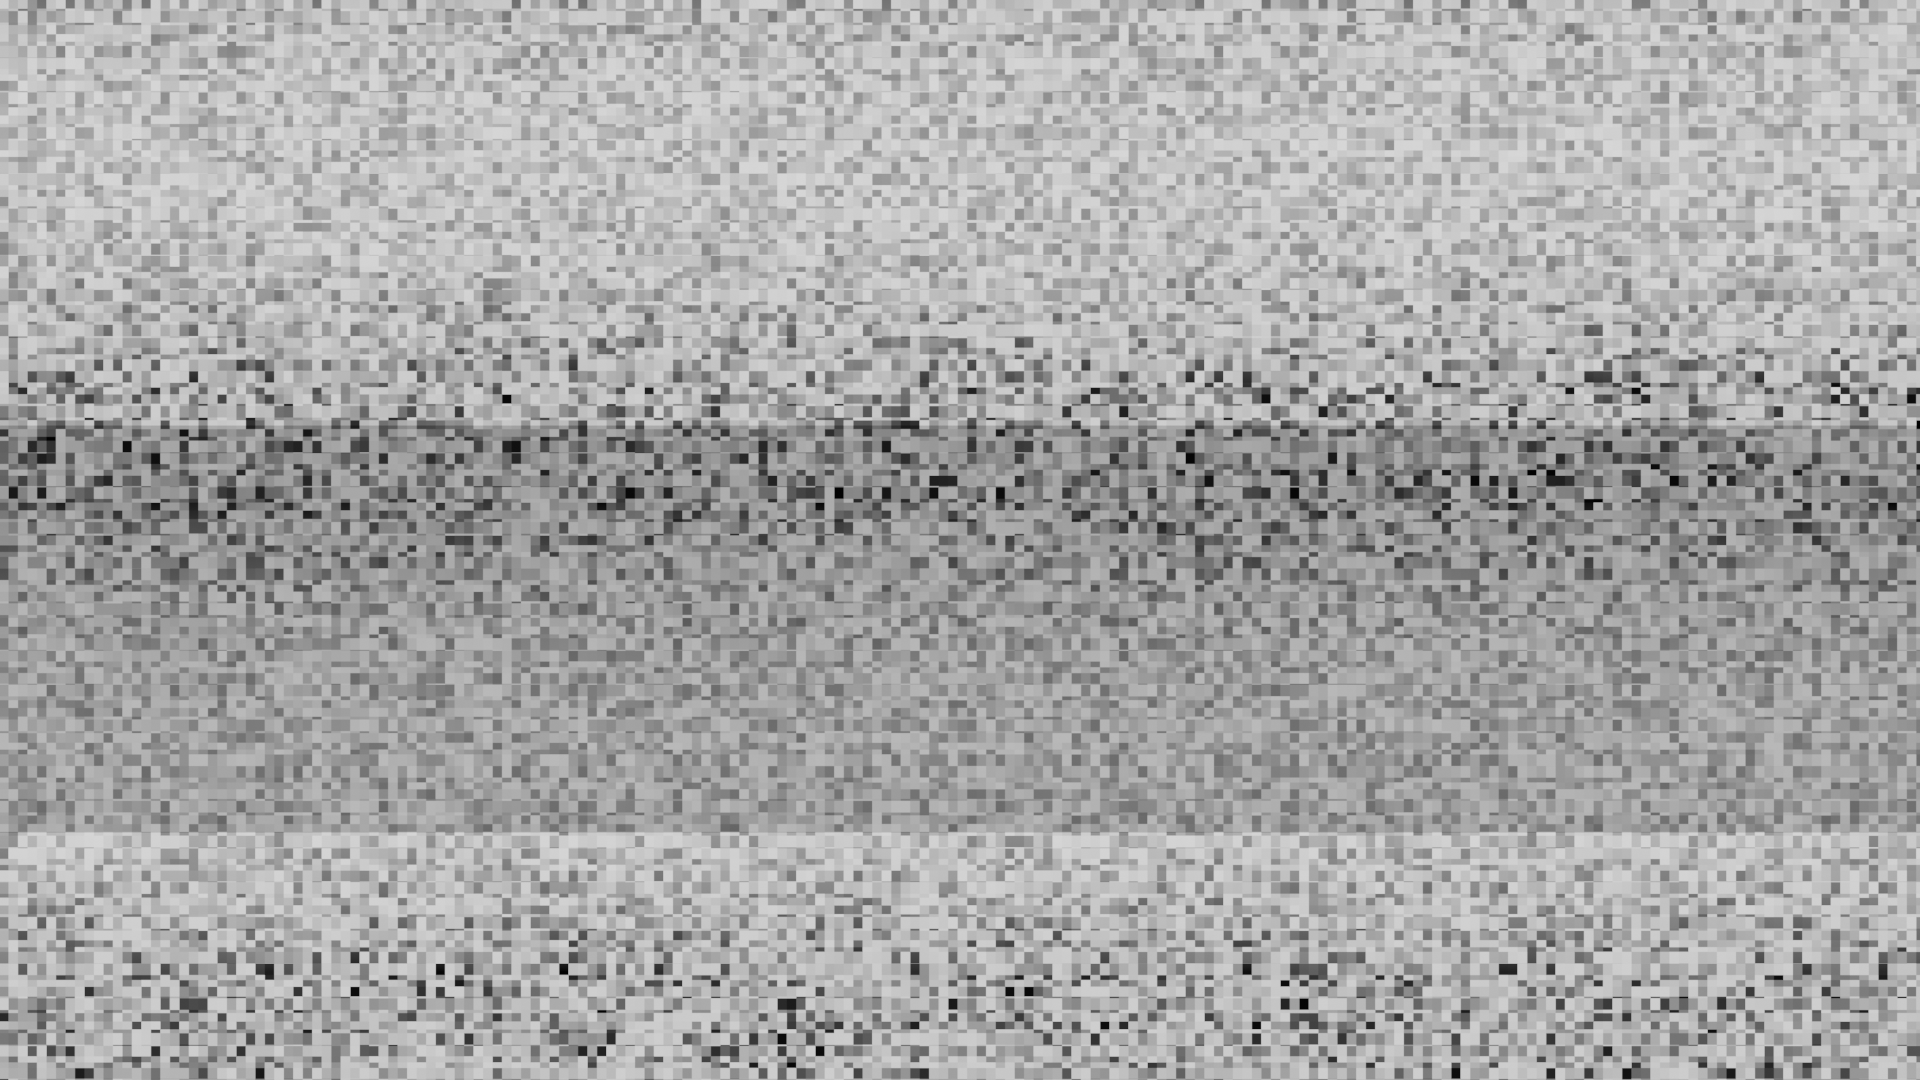 TV static noise effect preview image 1